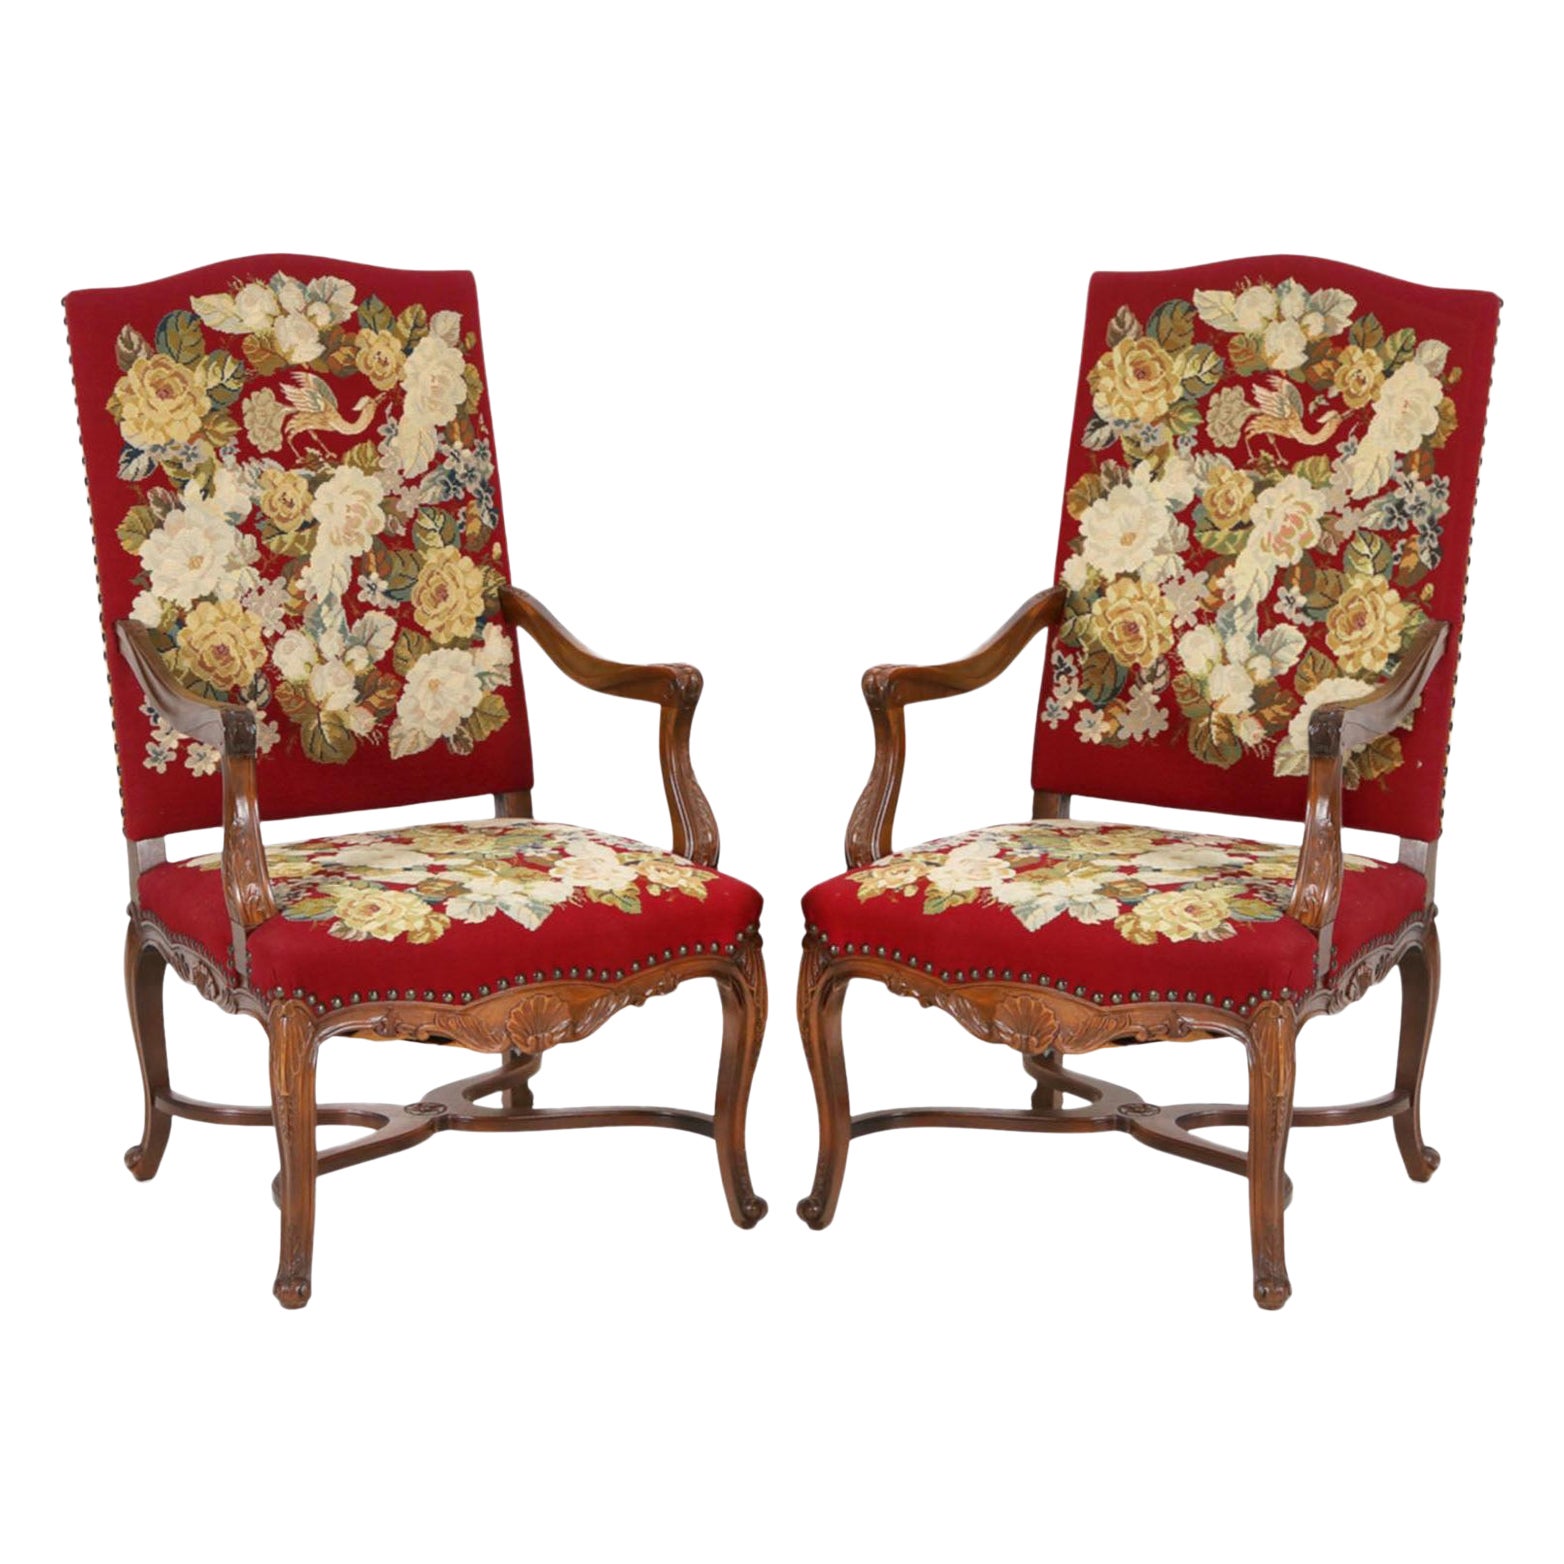 Baroque Pair of Armchairs with Gorgeous Embroidered Upholstery